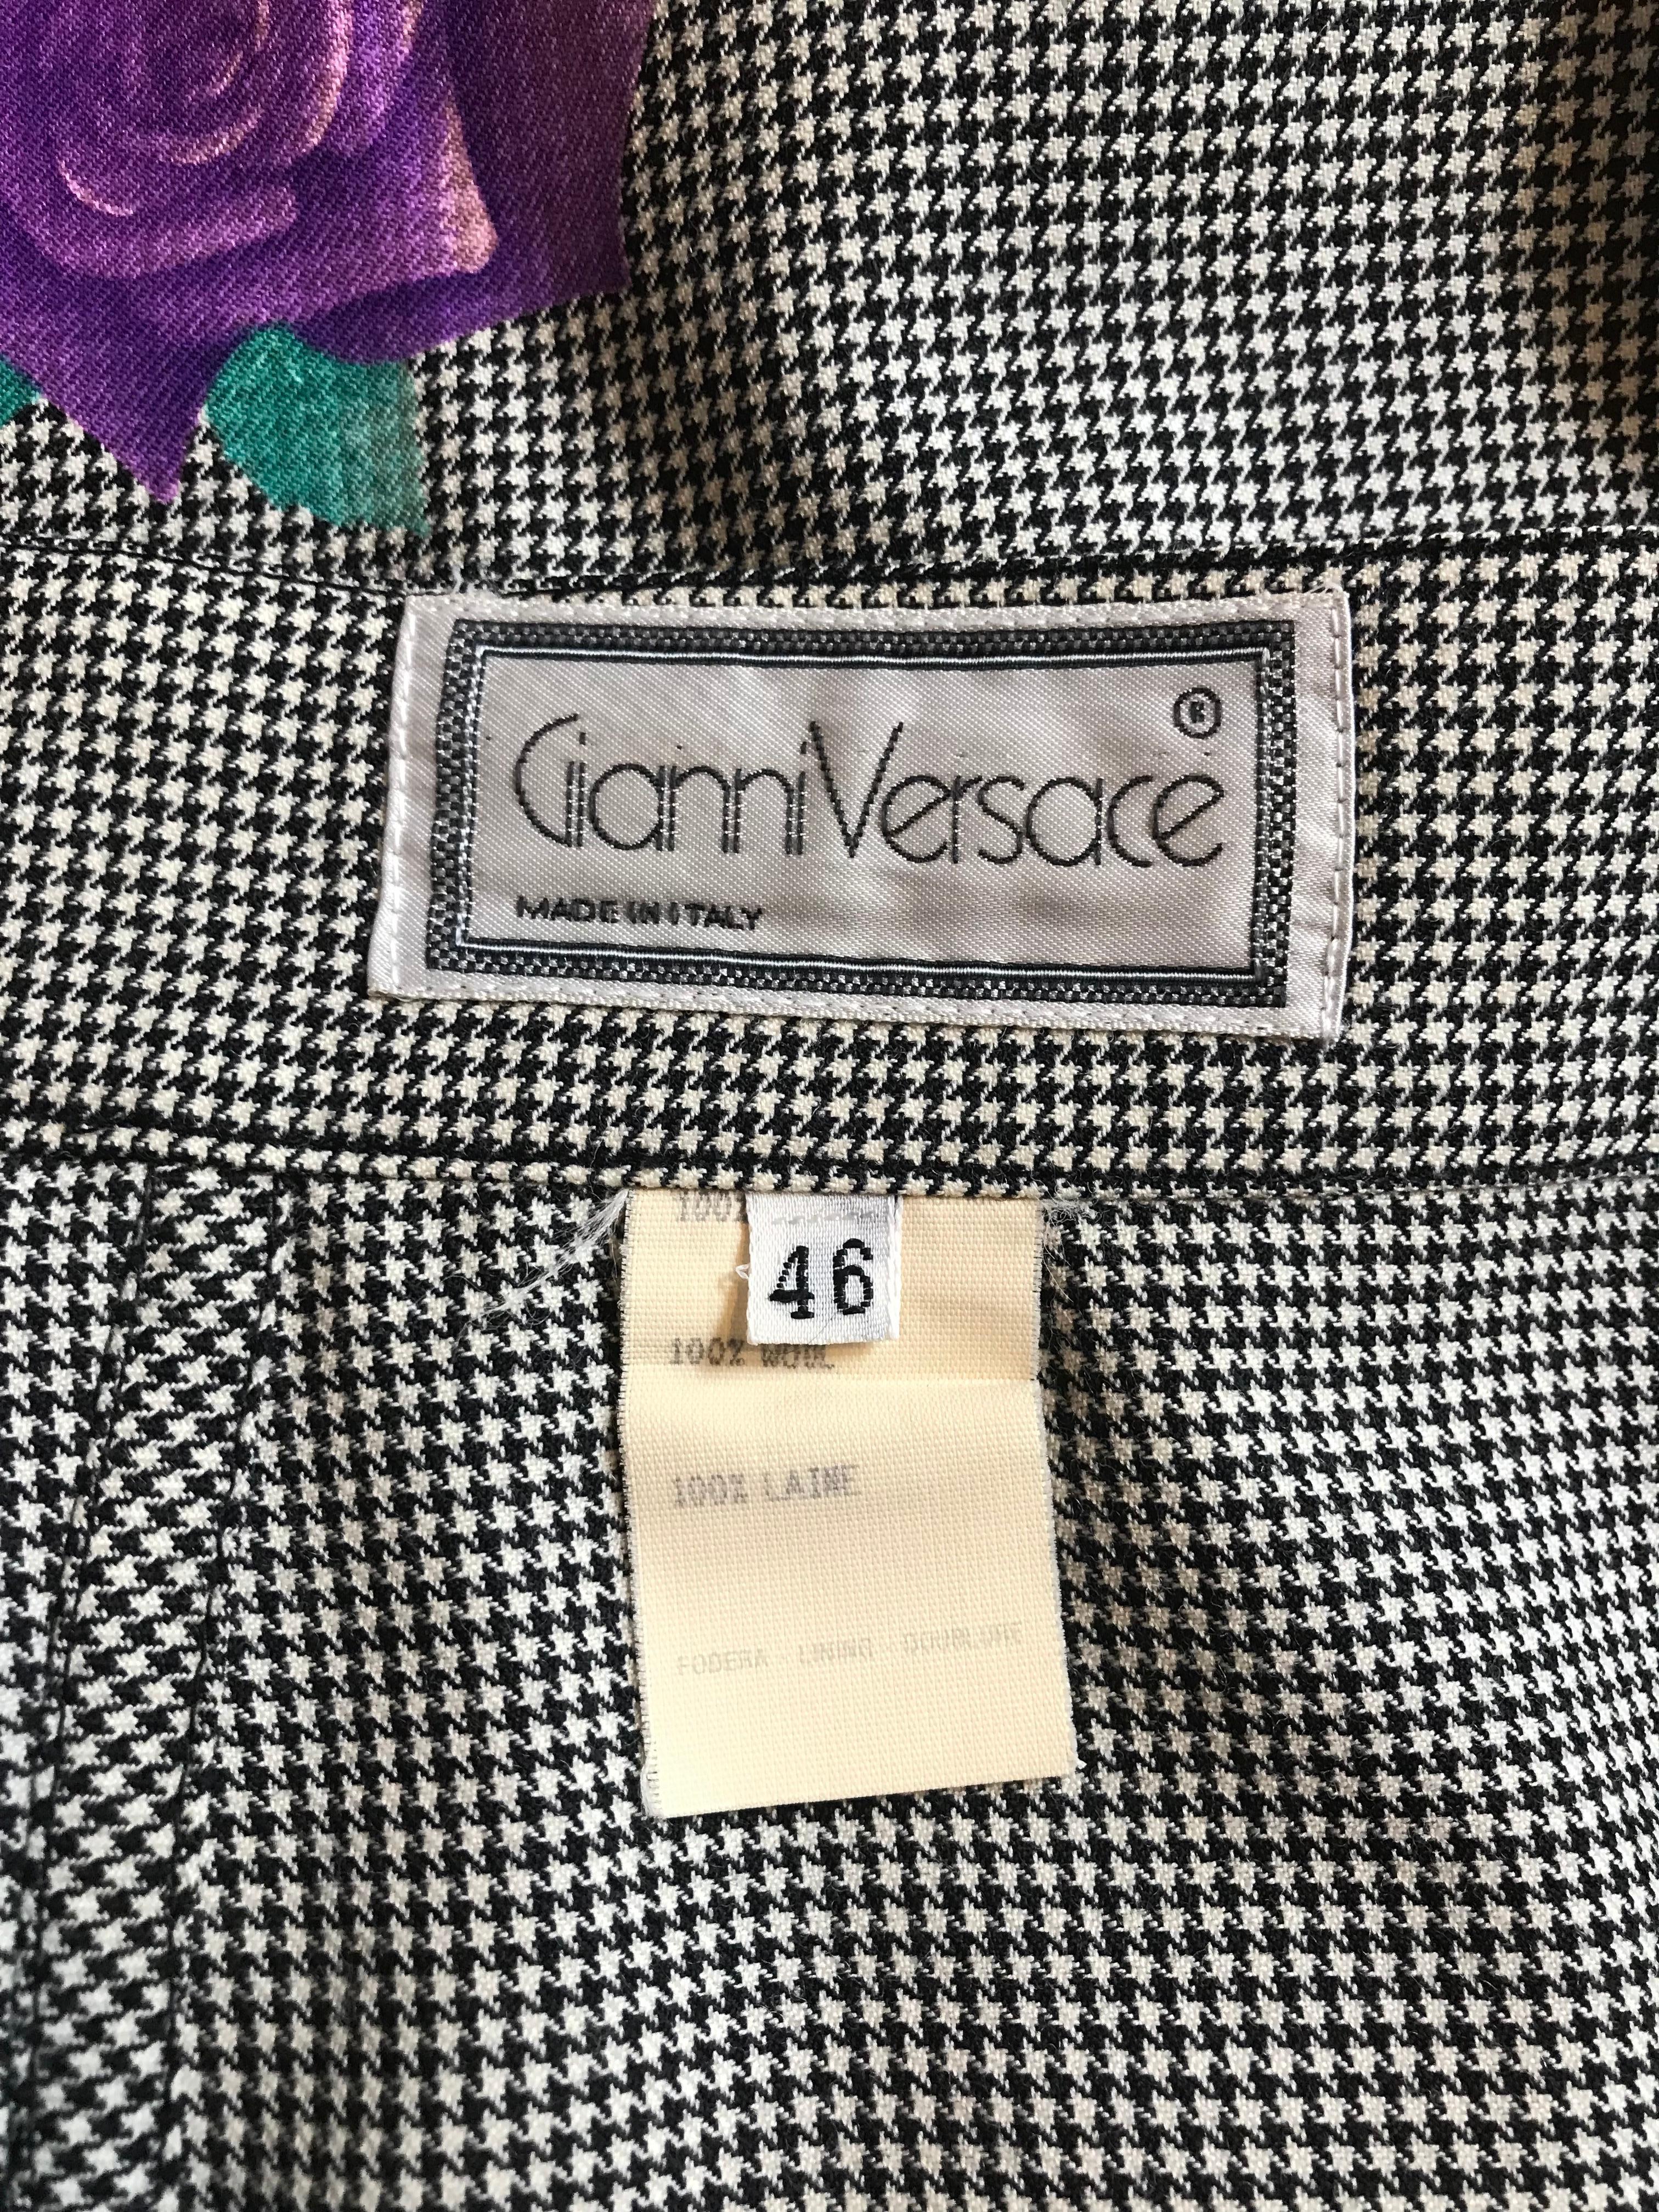 Gianni Versace 1990s Purple Flower Black White Houndstooth Skirt Suit For Sale 1